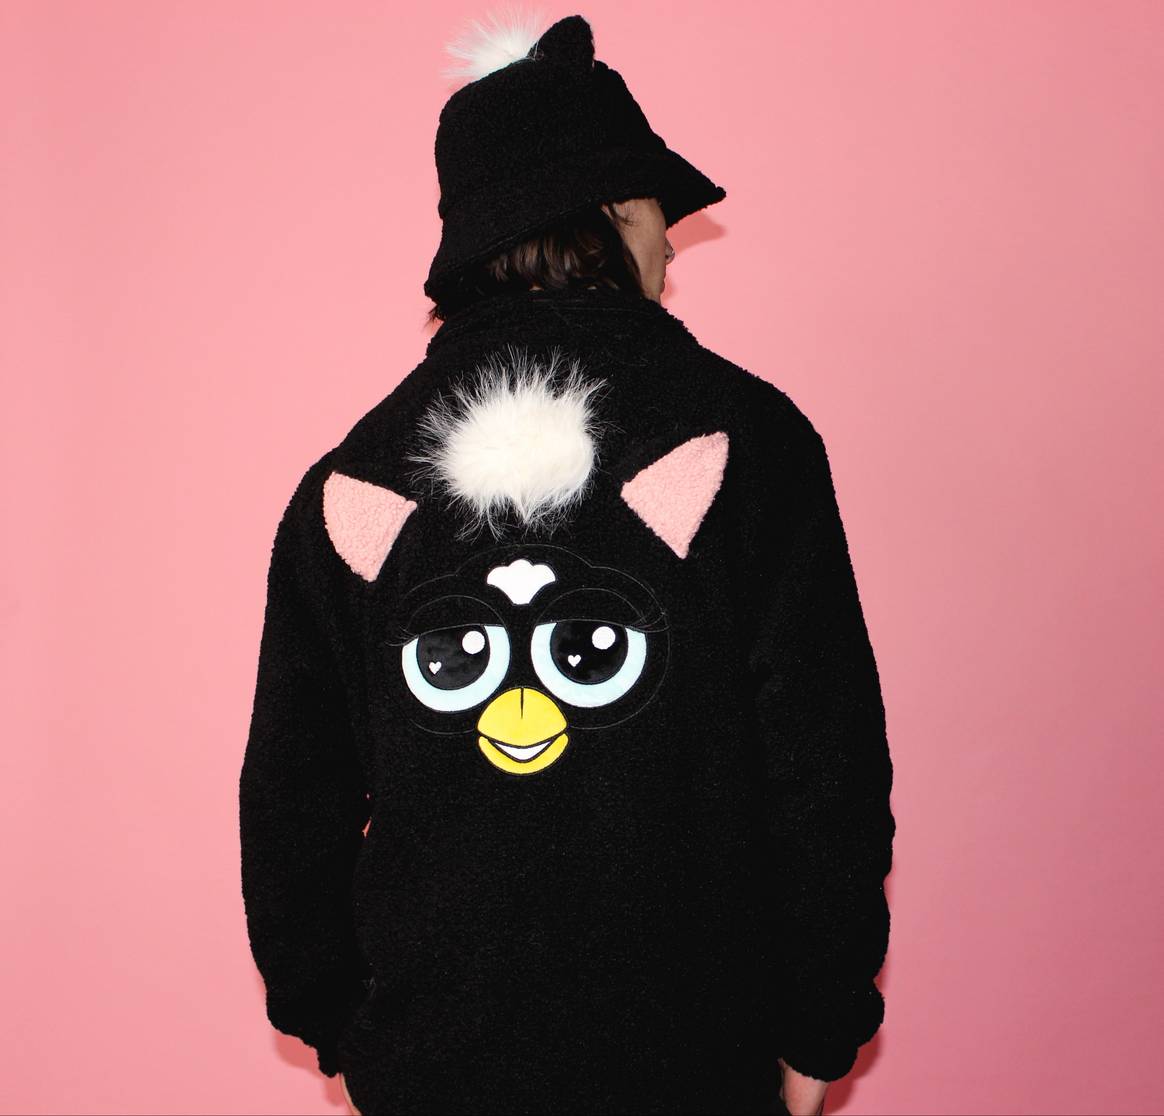 Cakeworthy x Furby collection